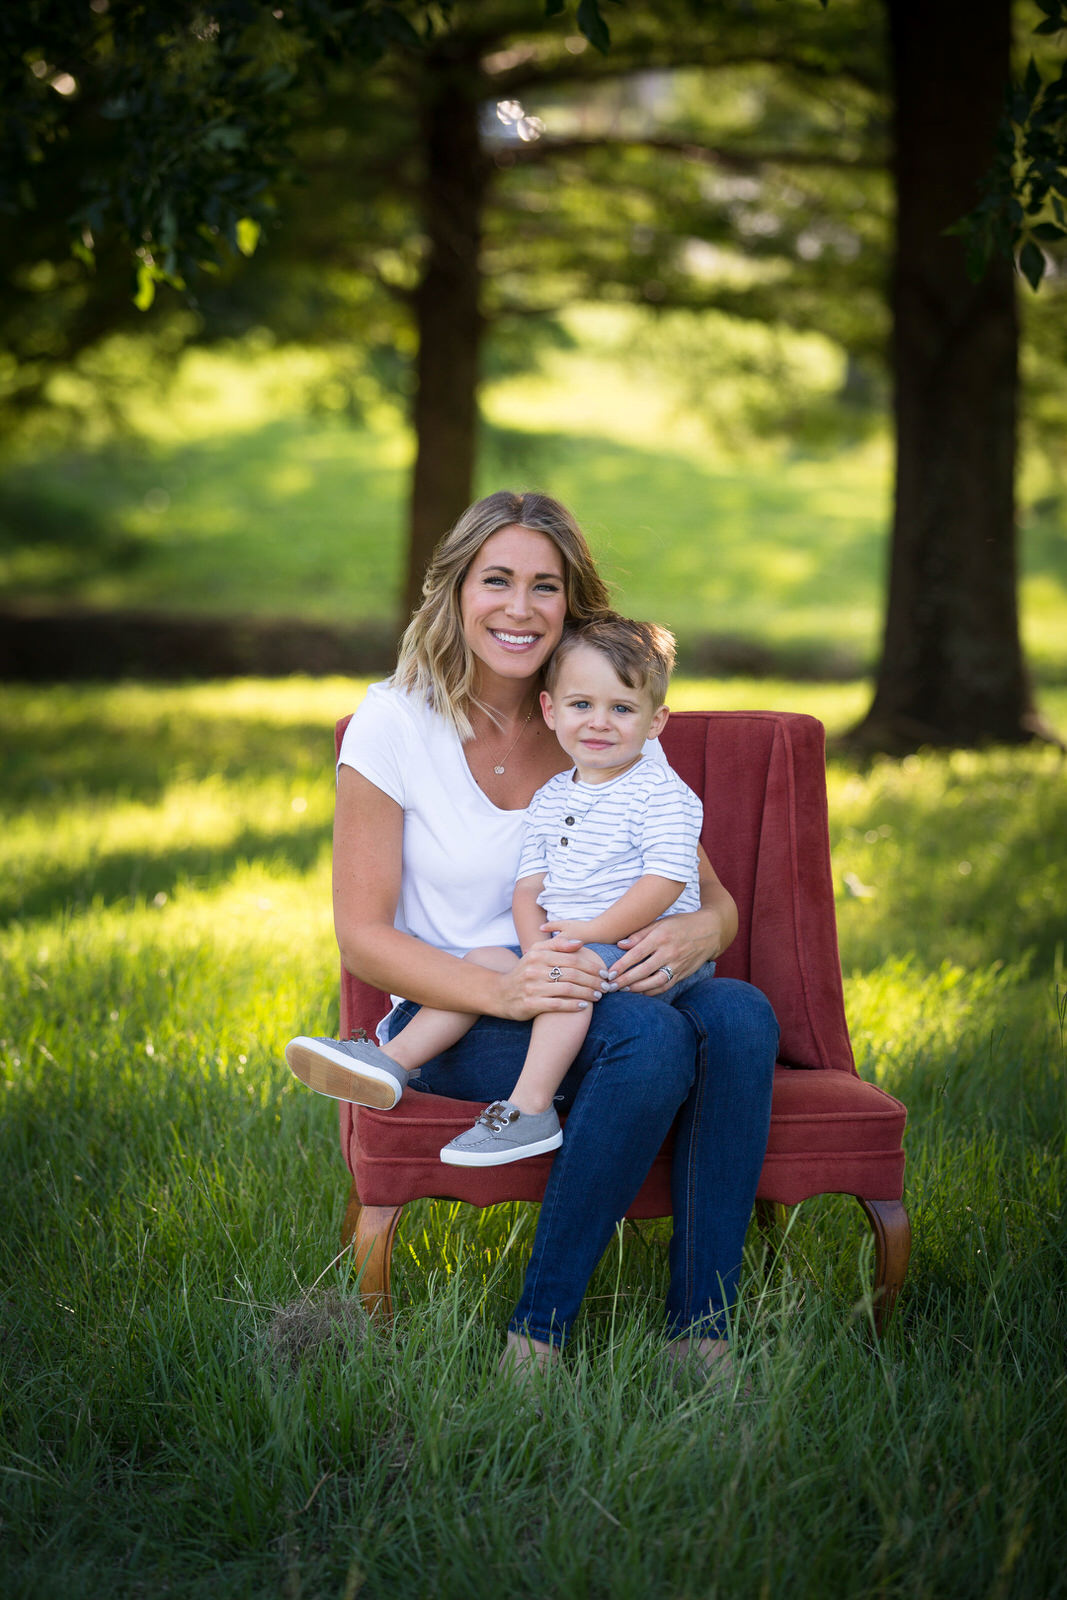 A mother in blue jeans sits in a red chair in a grassy park with her toddler son in her lap midlothian pediatricians